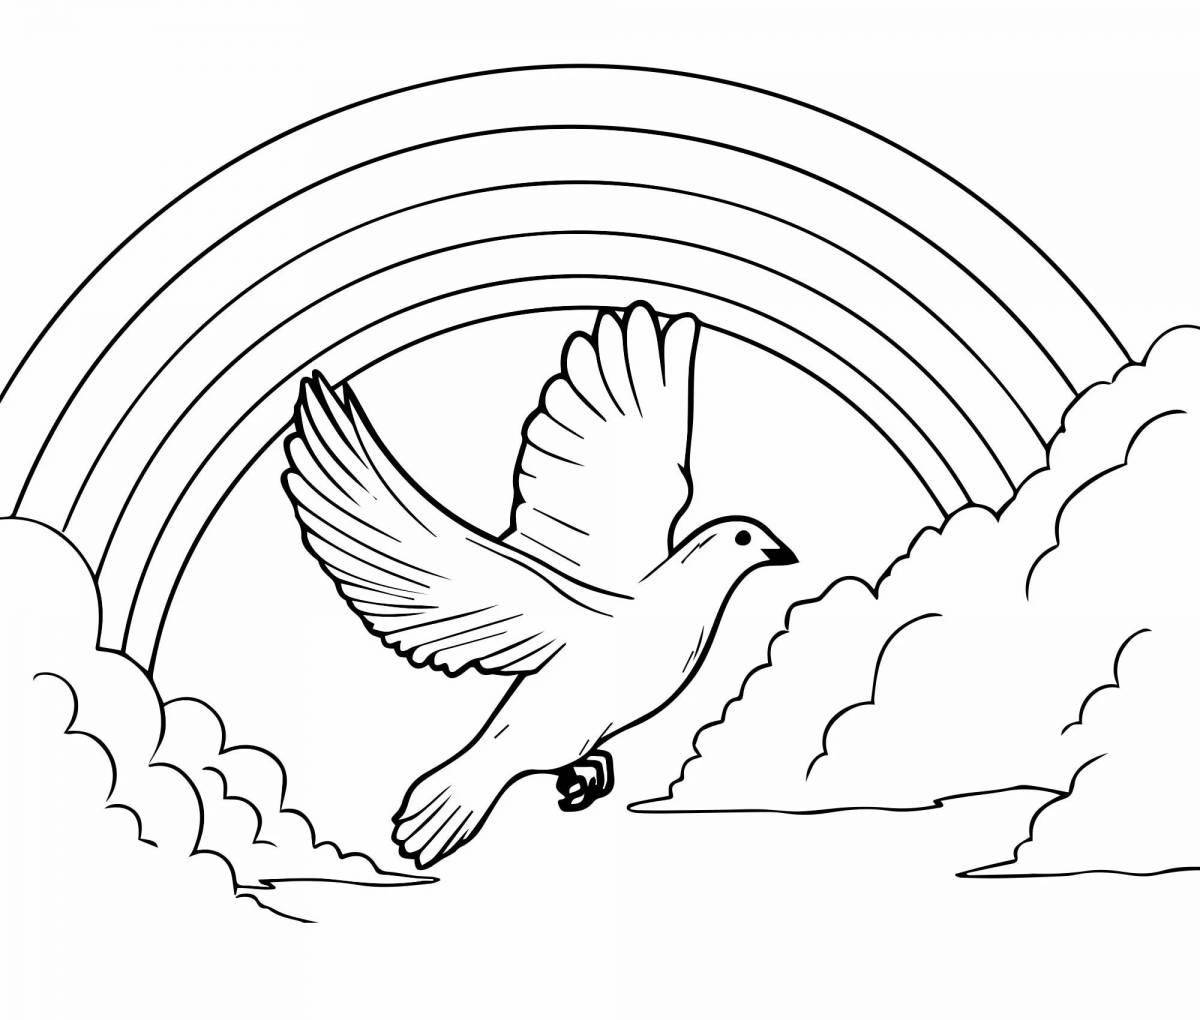 A fun dove of peace coloring book for kids